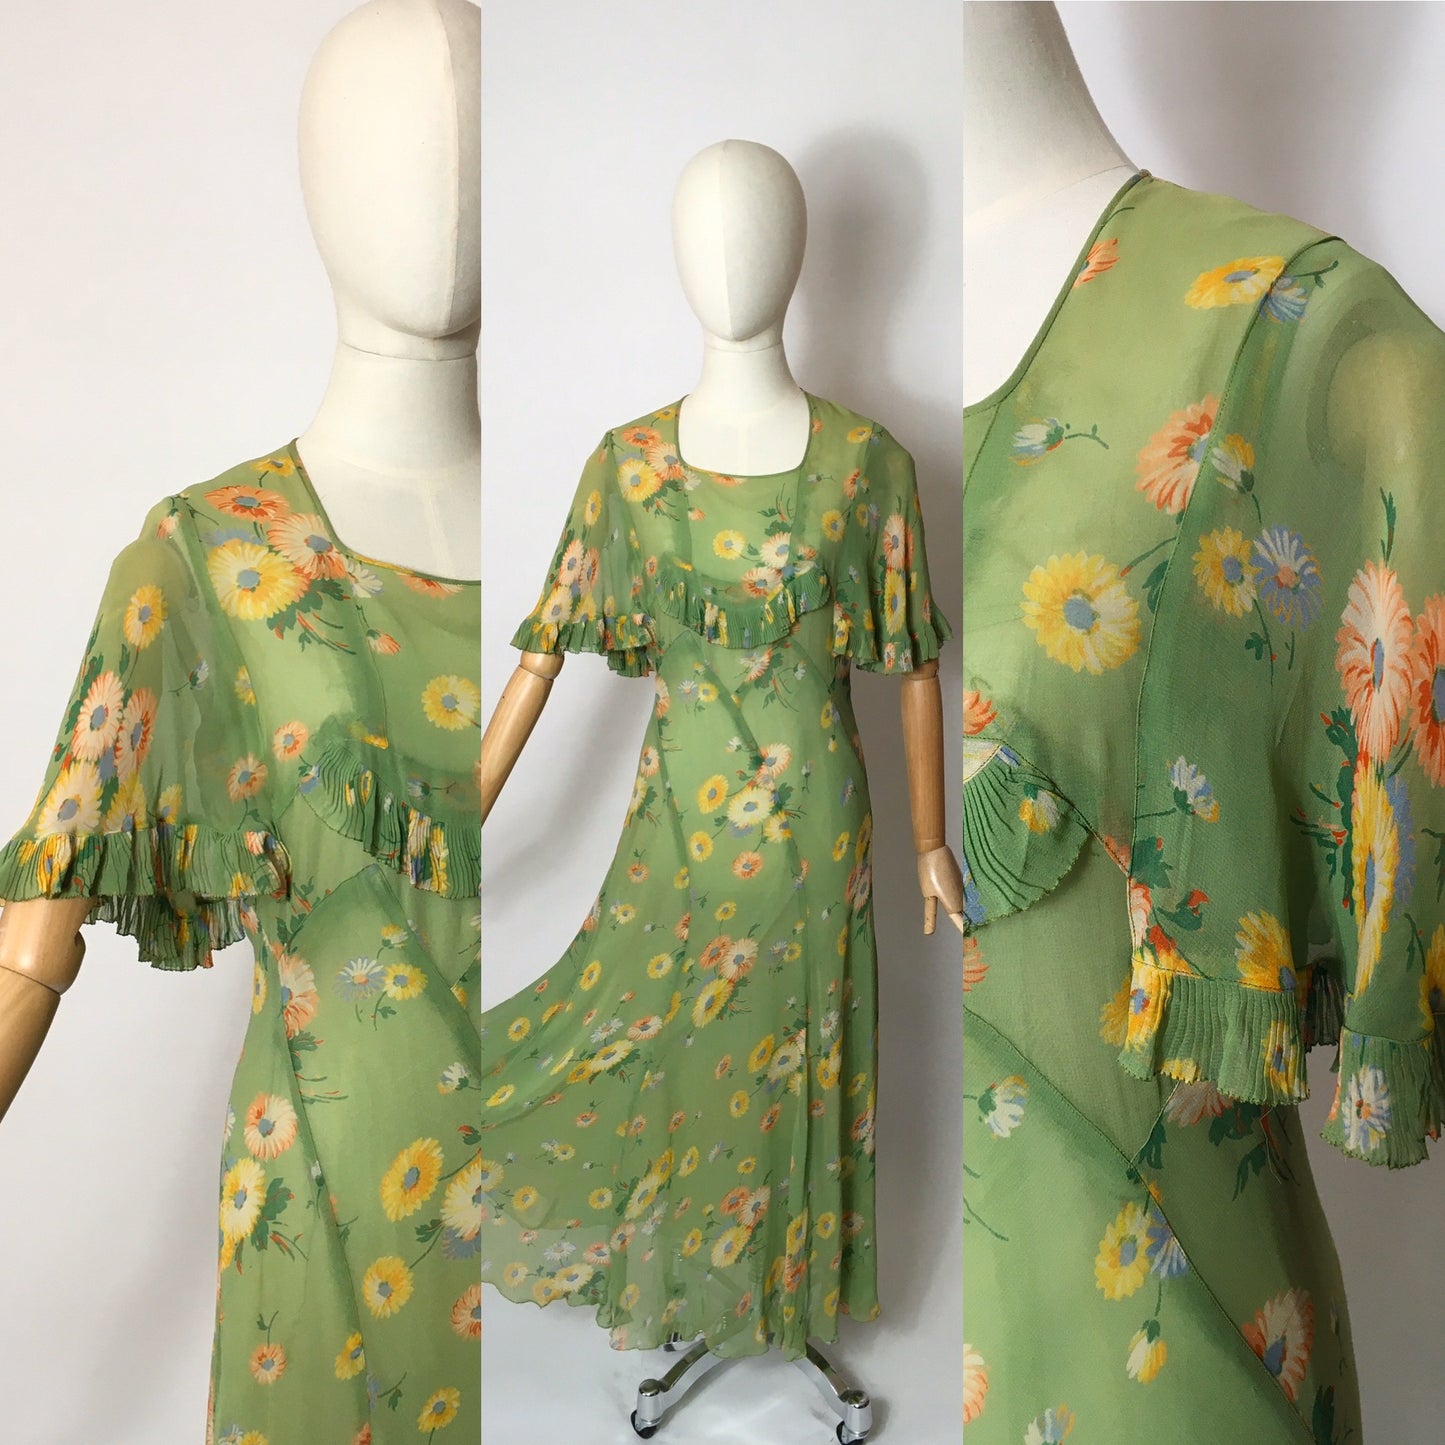 Original 1930’s Bias Cut Gown In An Exquisite Colour Pallet of Deco Green, soft blues, oranges and yellows - A Festival Of Vintage Fashion Show Exclusive